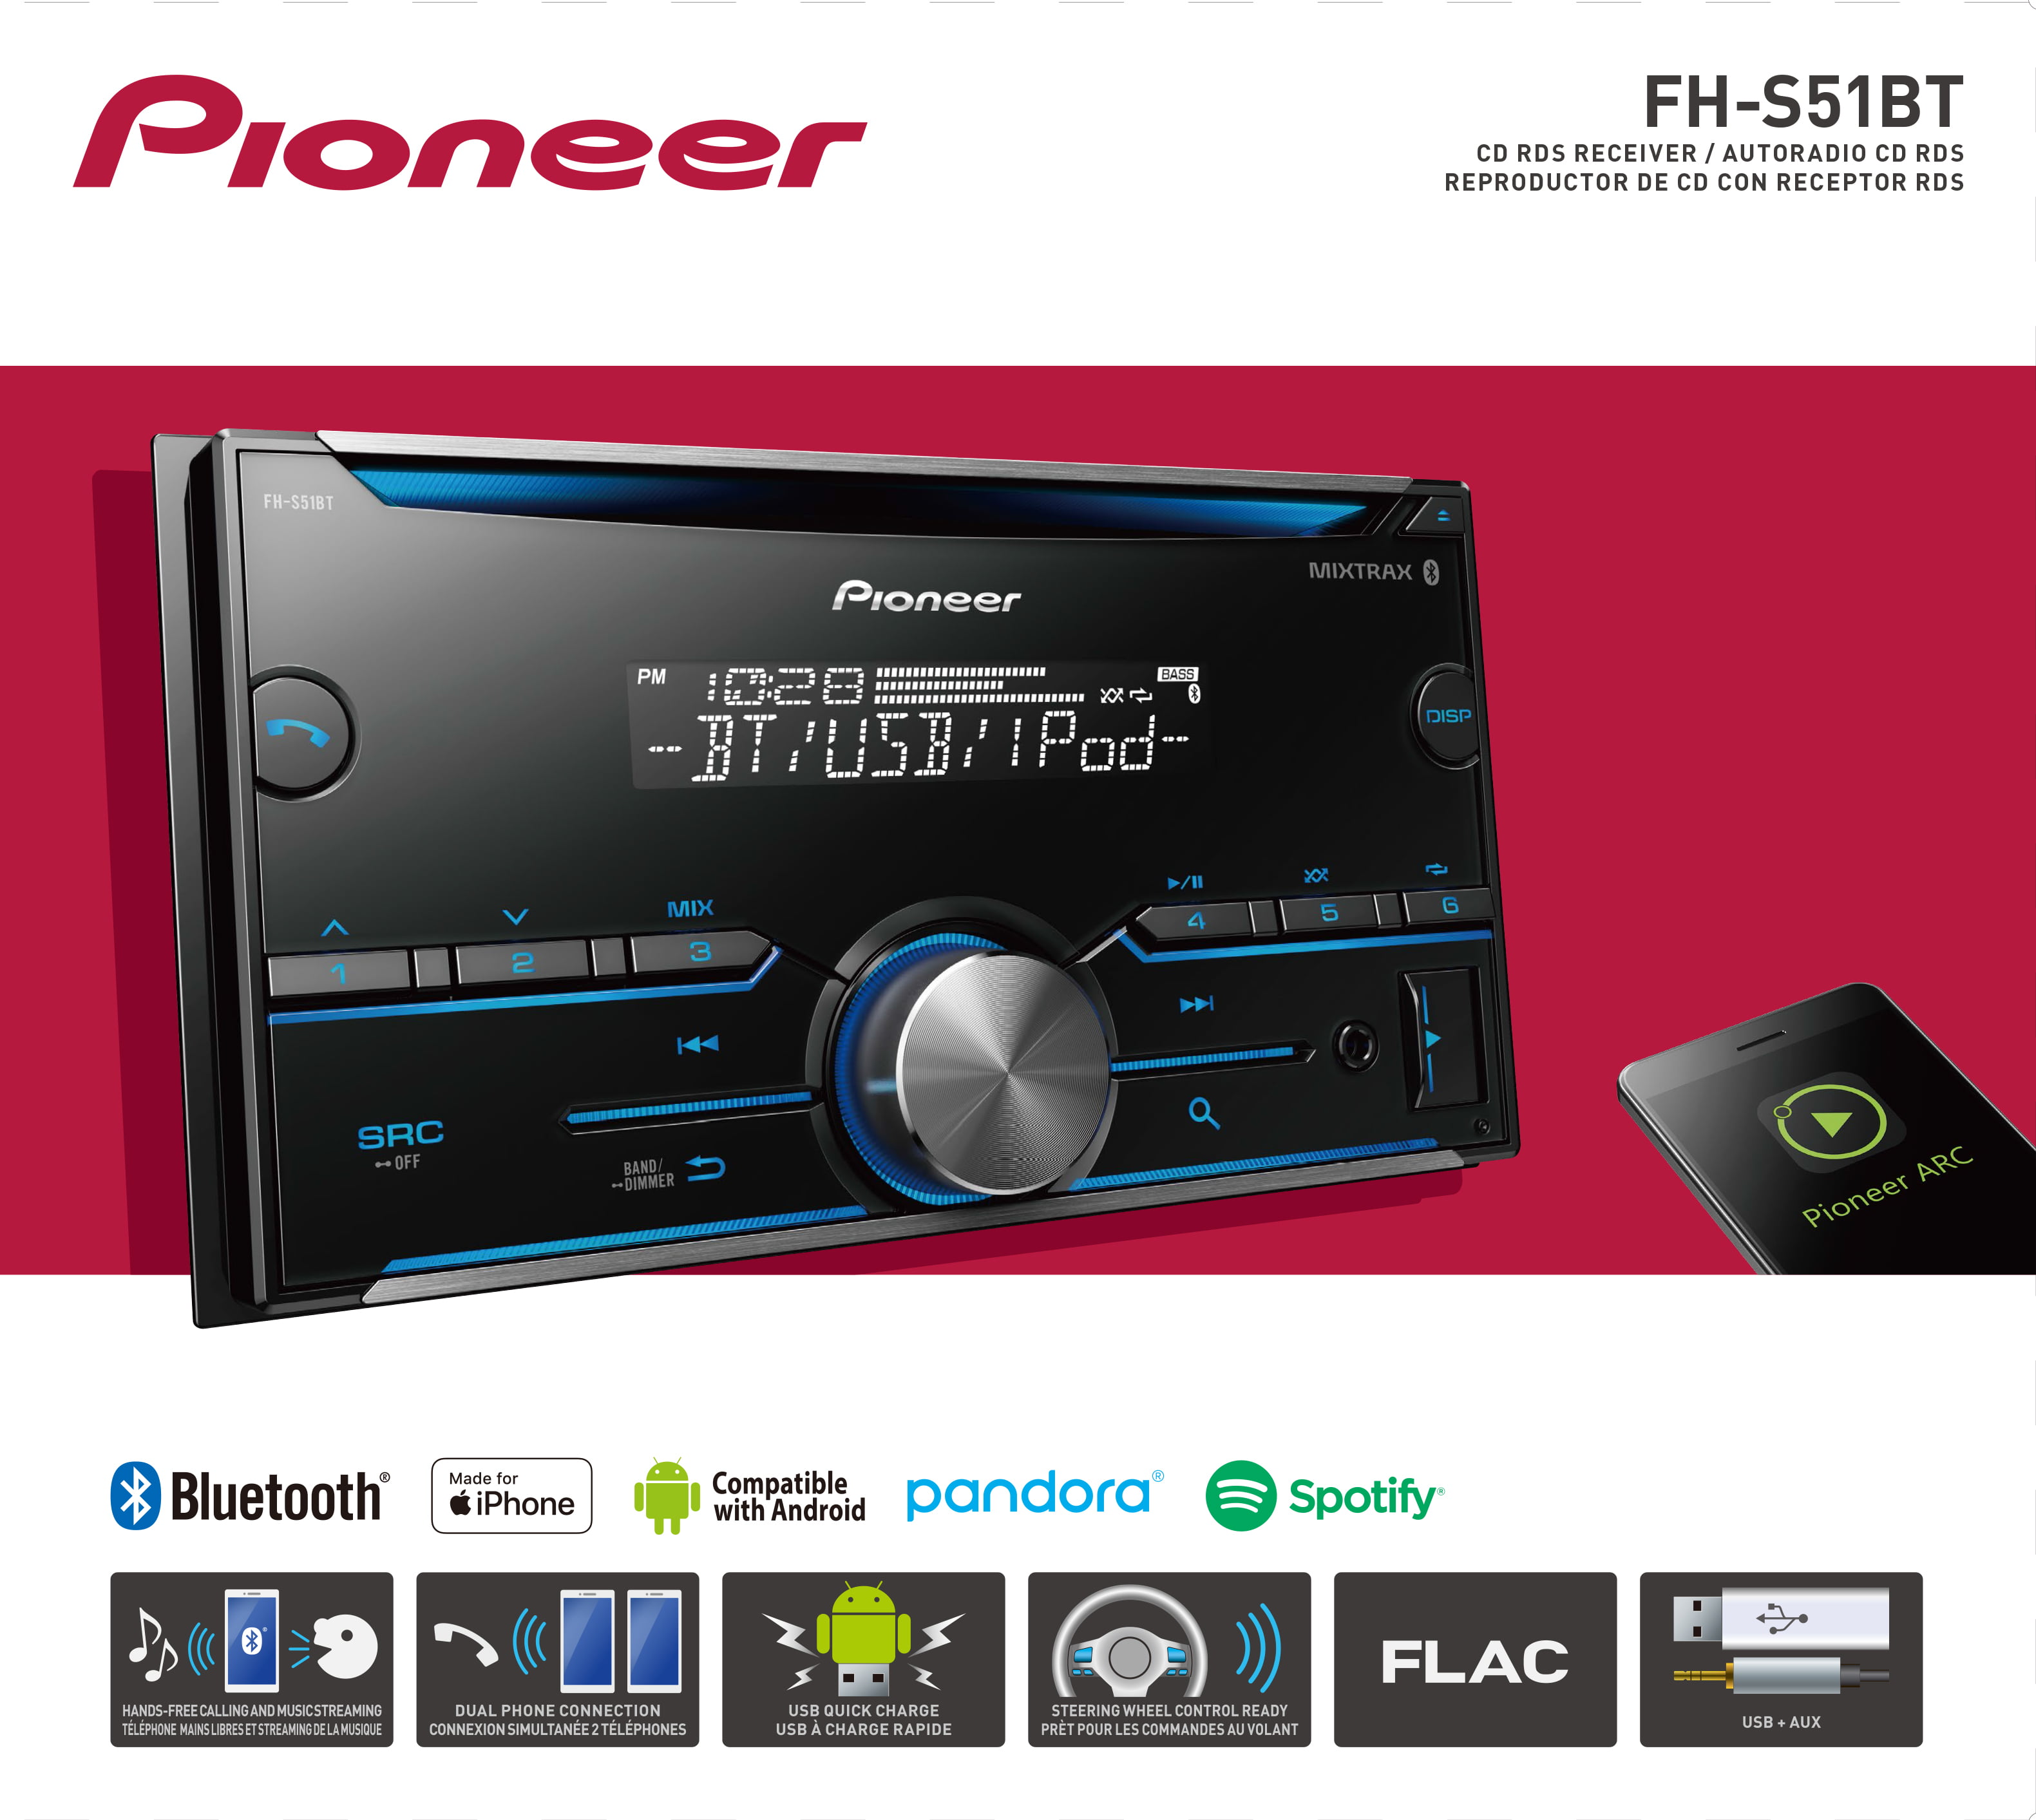 Pioneer FH-S51BT 2 DIN CD Receiver Car Audio with USB MP3 Bluetooth 